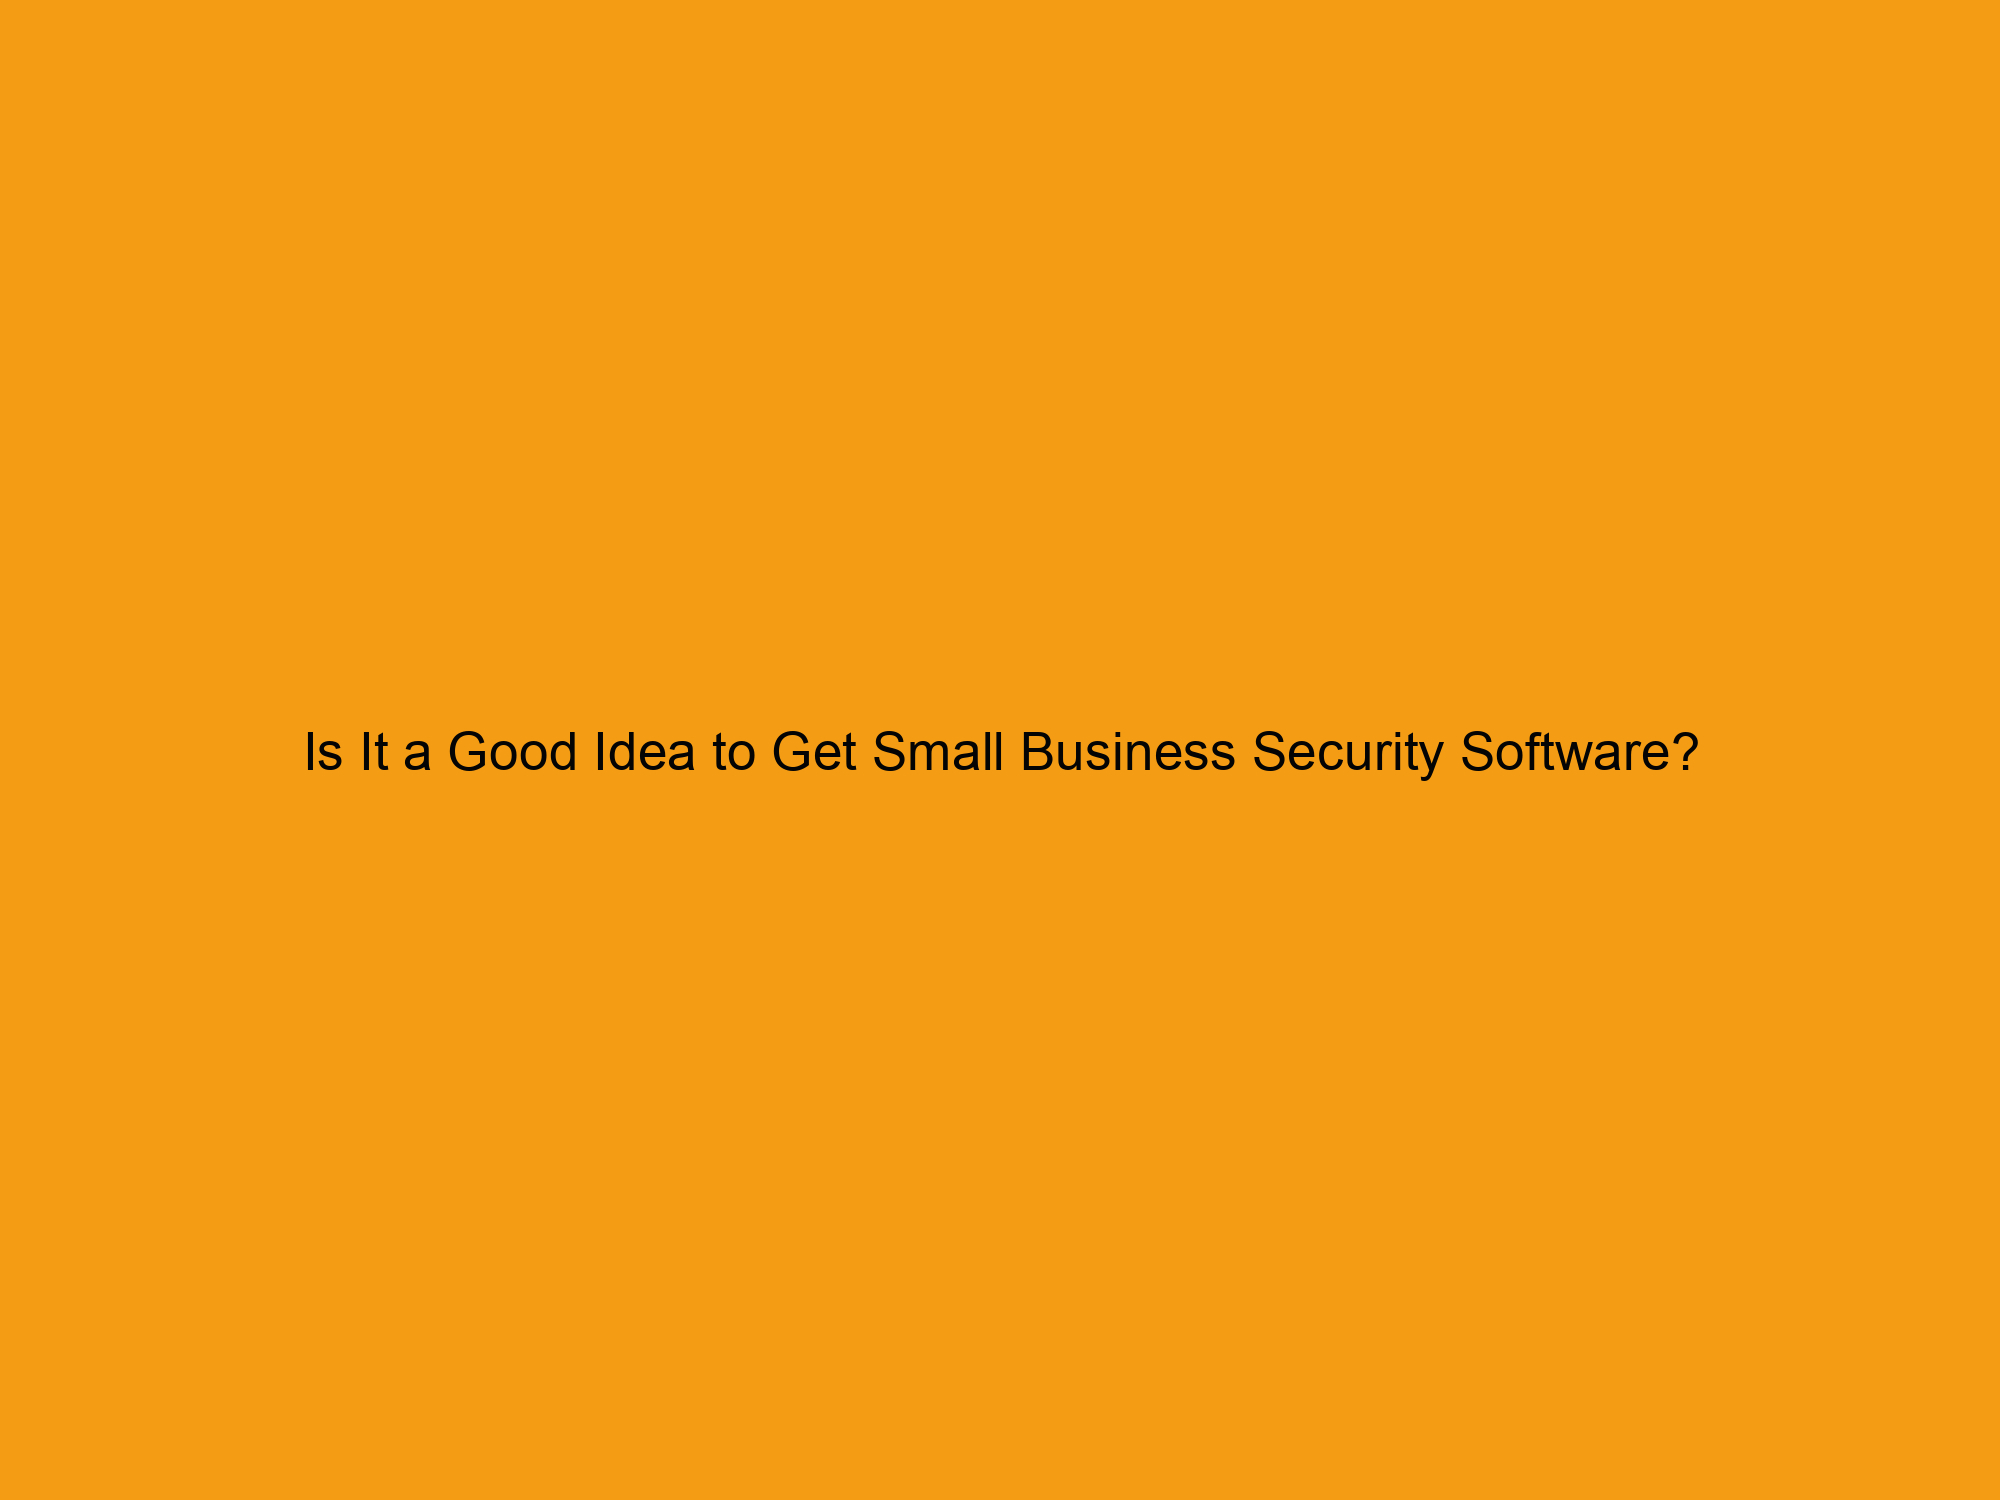 Is It a Good Idea to Get Small Business Security Software?